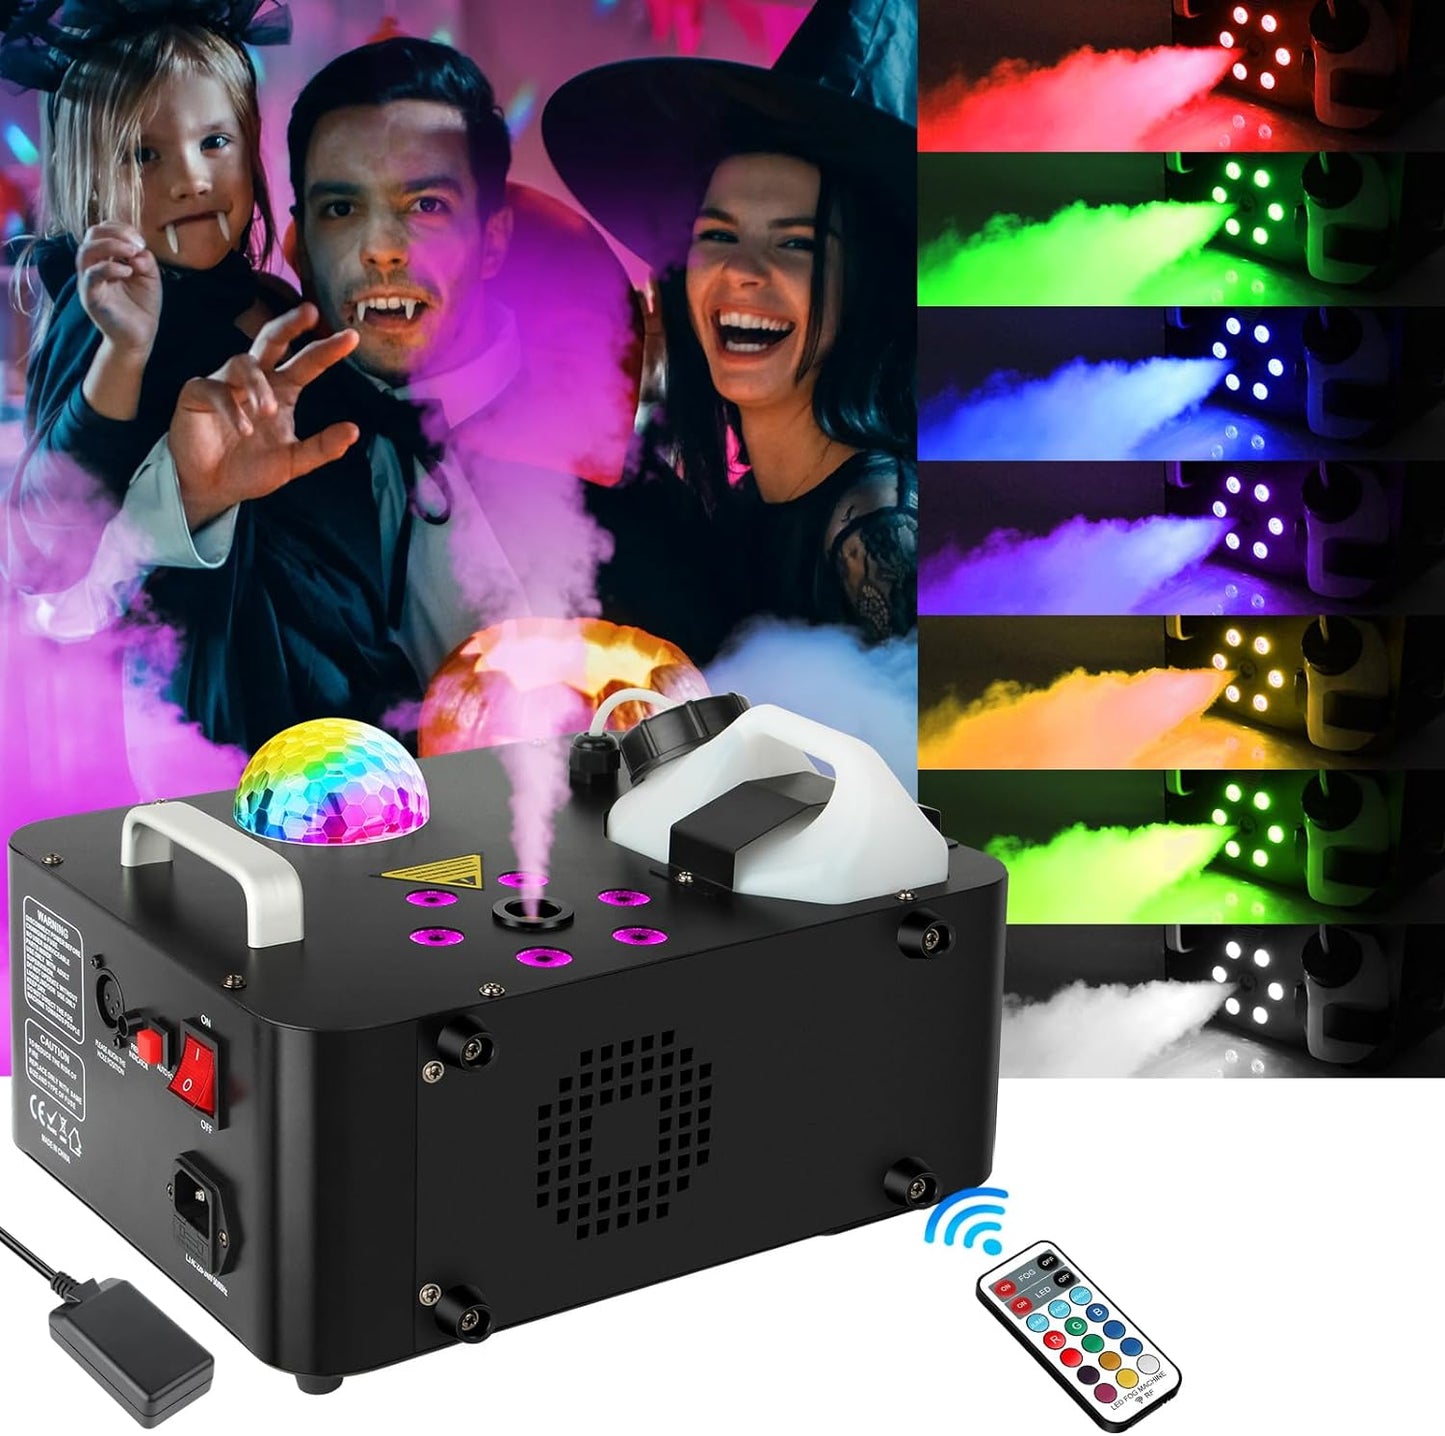 Stage Fog Machines DJ Party: 1000W Stage Smoke Machine Maker with RGB 6LEDs Par & Disco Ball Lighting Effects By Remote Control for Wedding Christmas Halloween Music Dance Live Show Decora